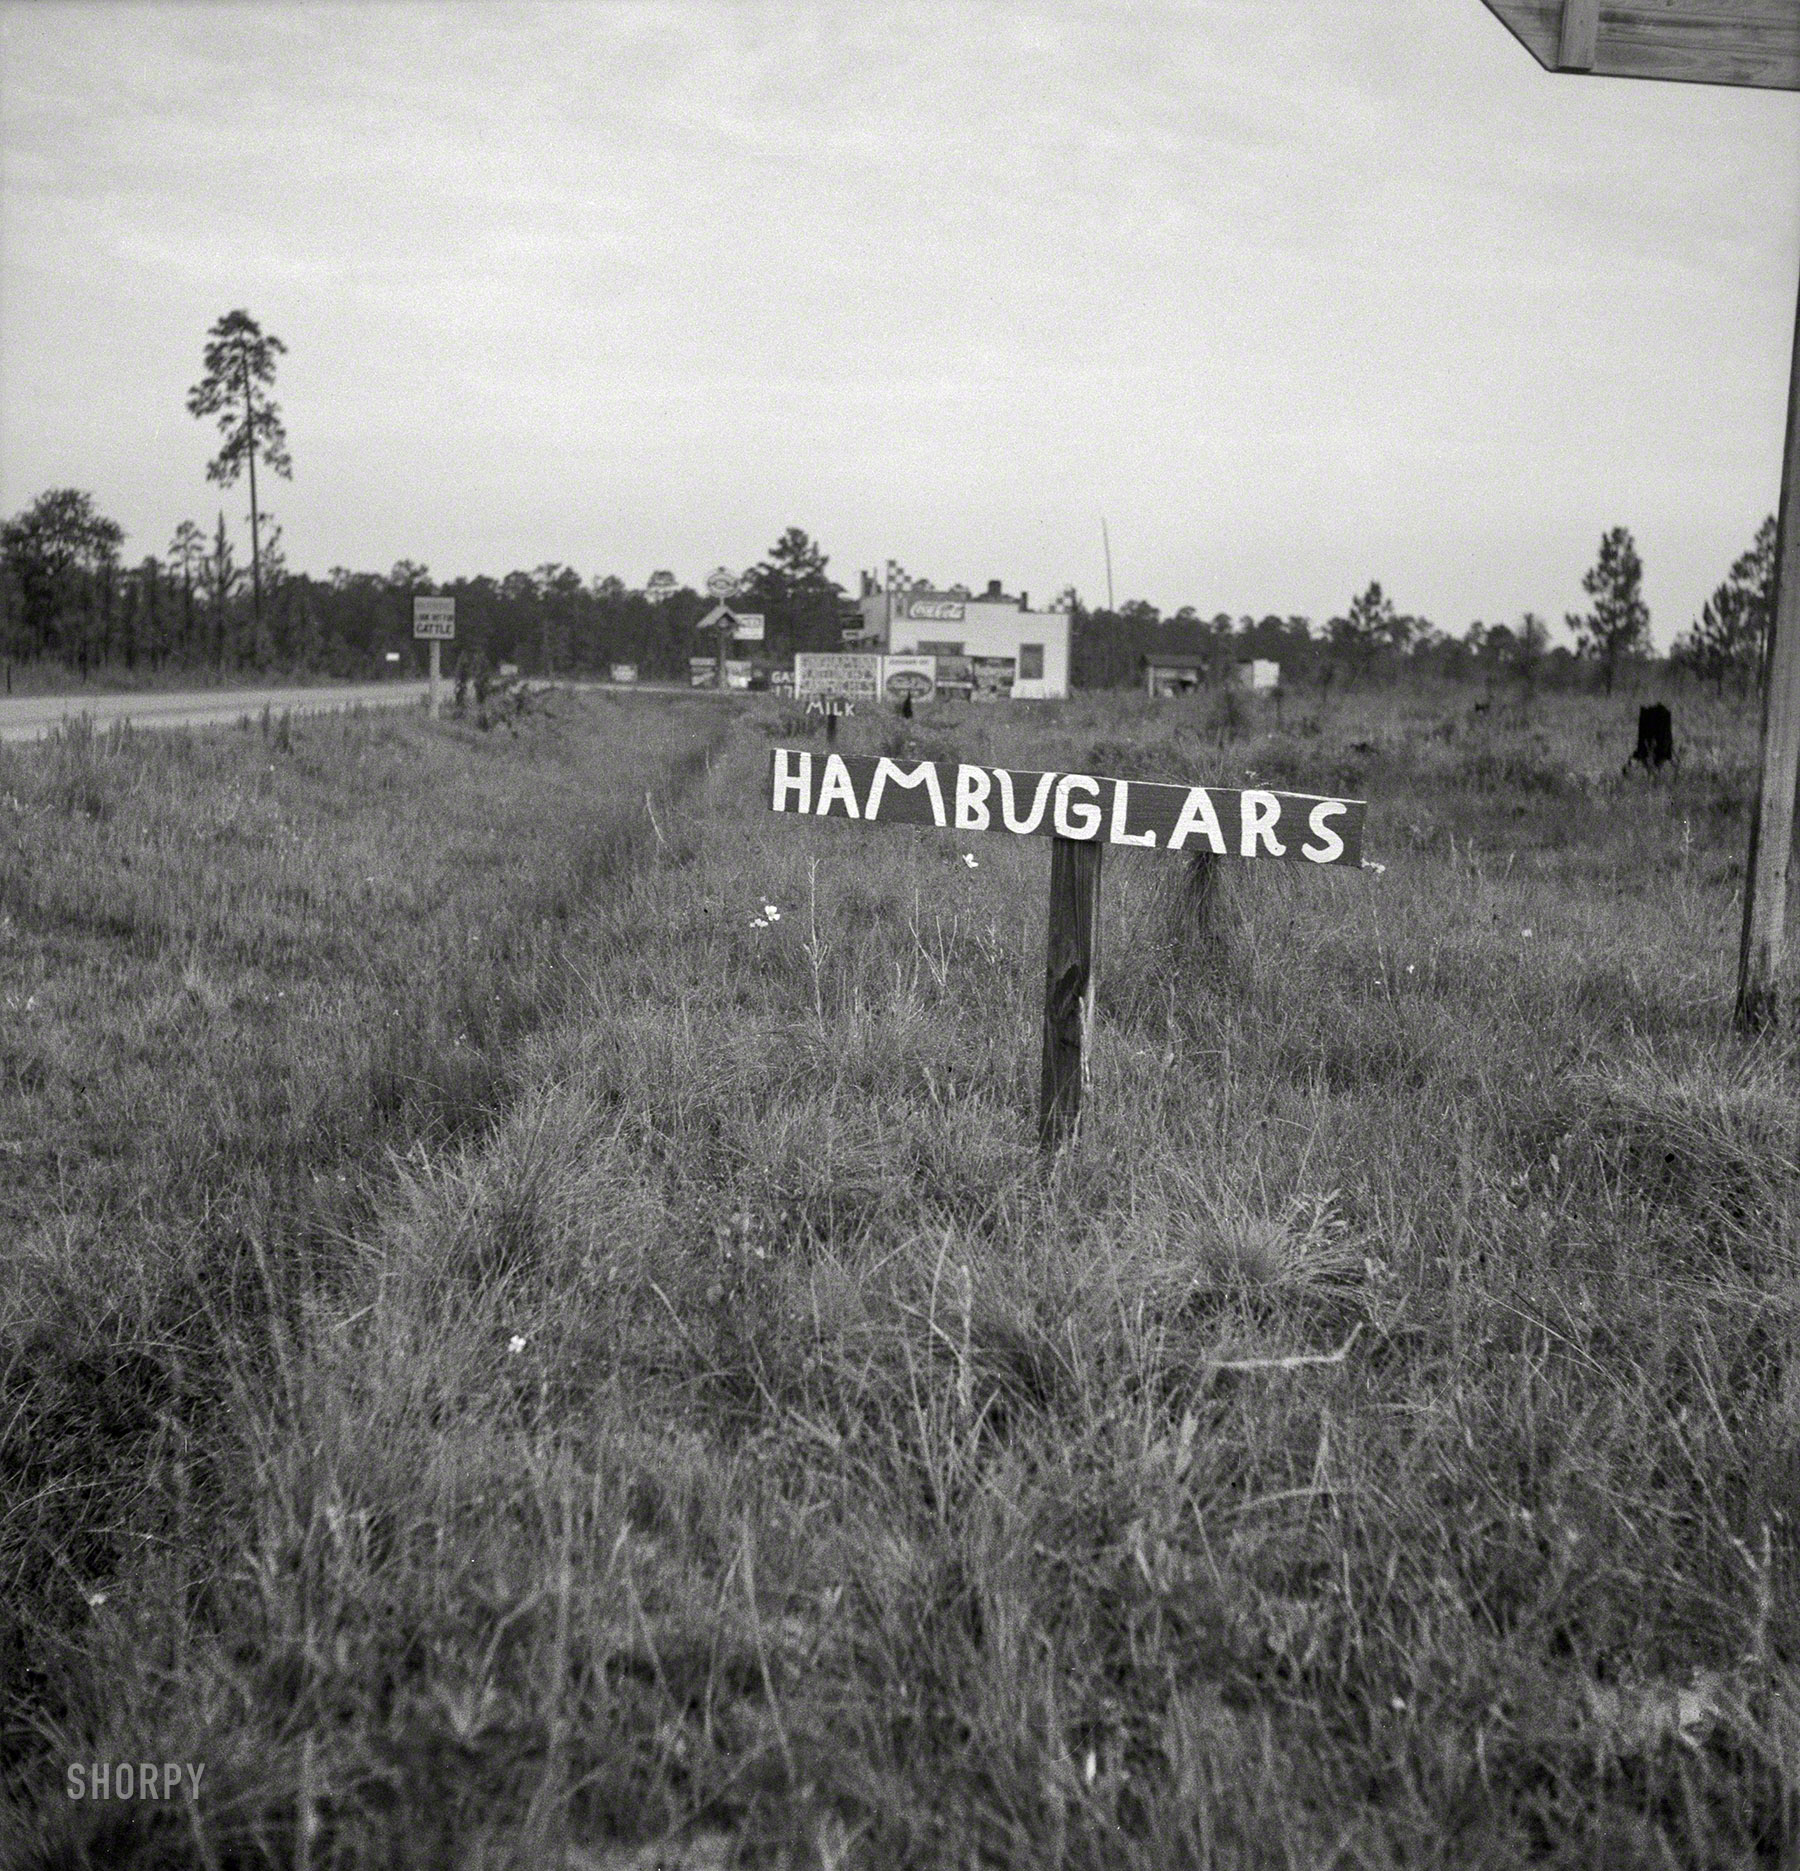 July 1937. "Georgia road sign." Photo by Dorothea Lange, who seems to have appreciated quirky signs. More to come later in the week. View full size.